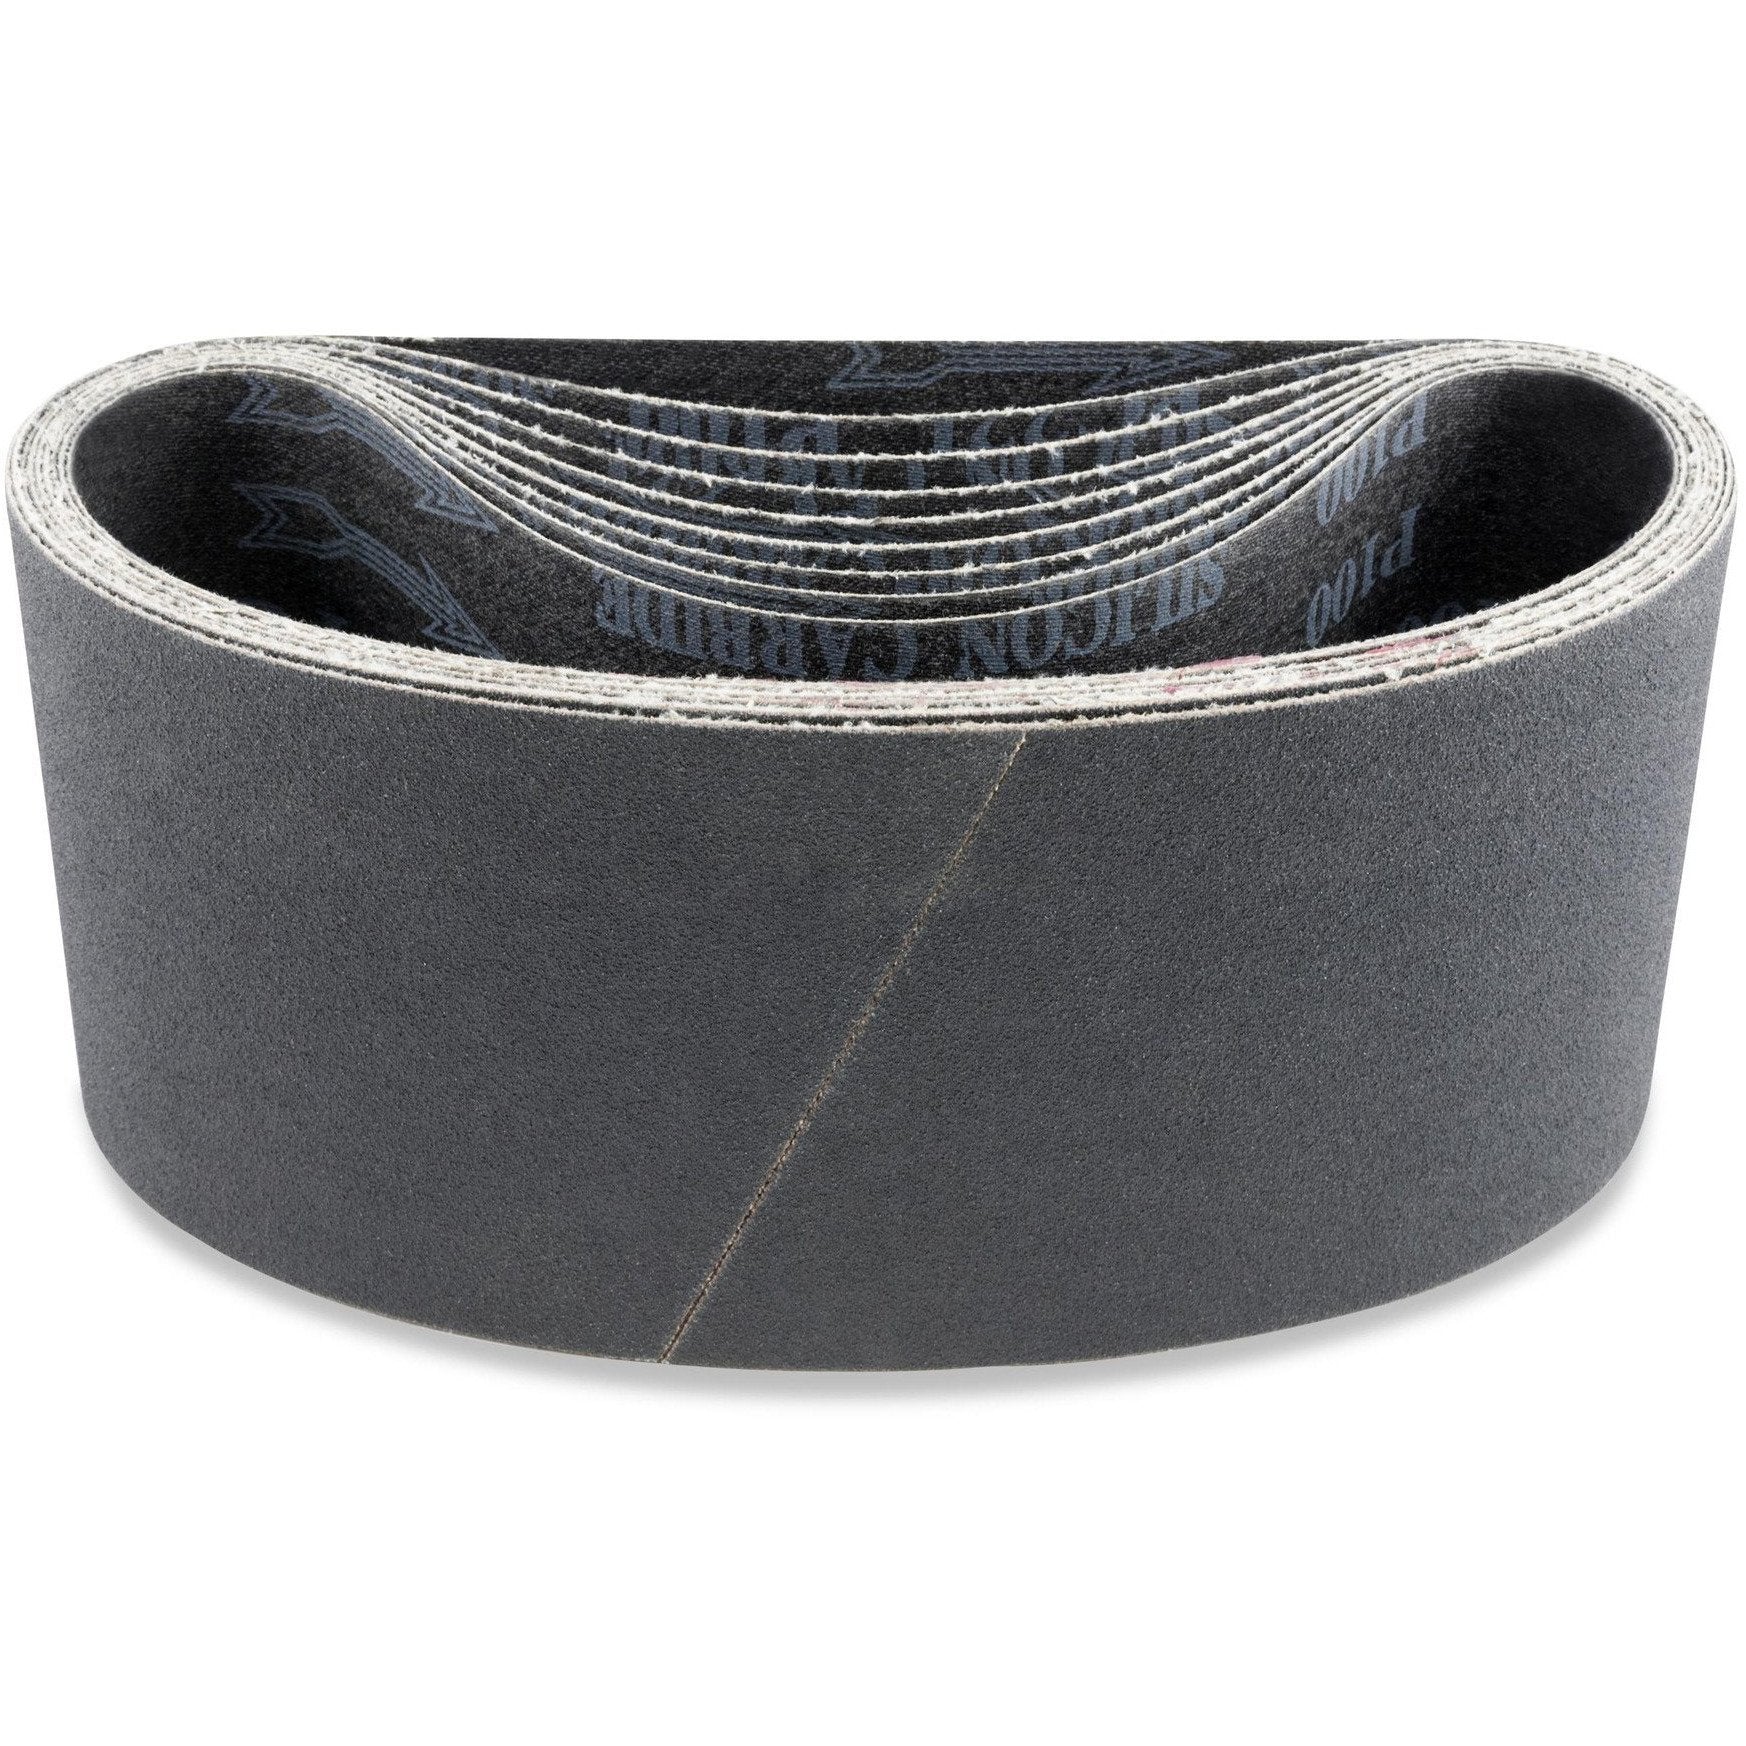 3 X 18 Inch Industrial Grade Silicon Carbide Sanding Belts, 8 Pack - Red Label Abrasives